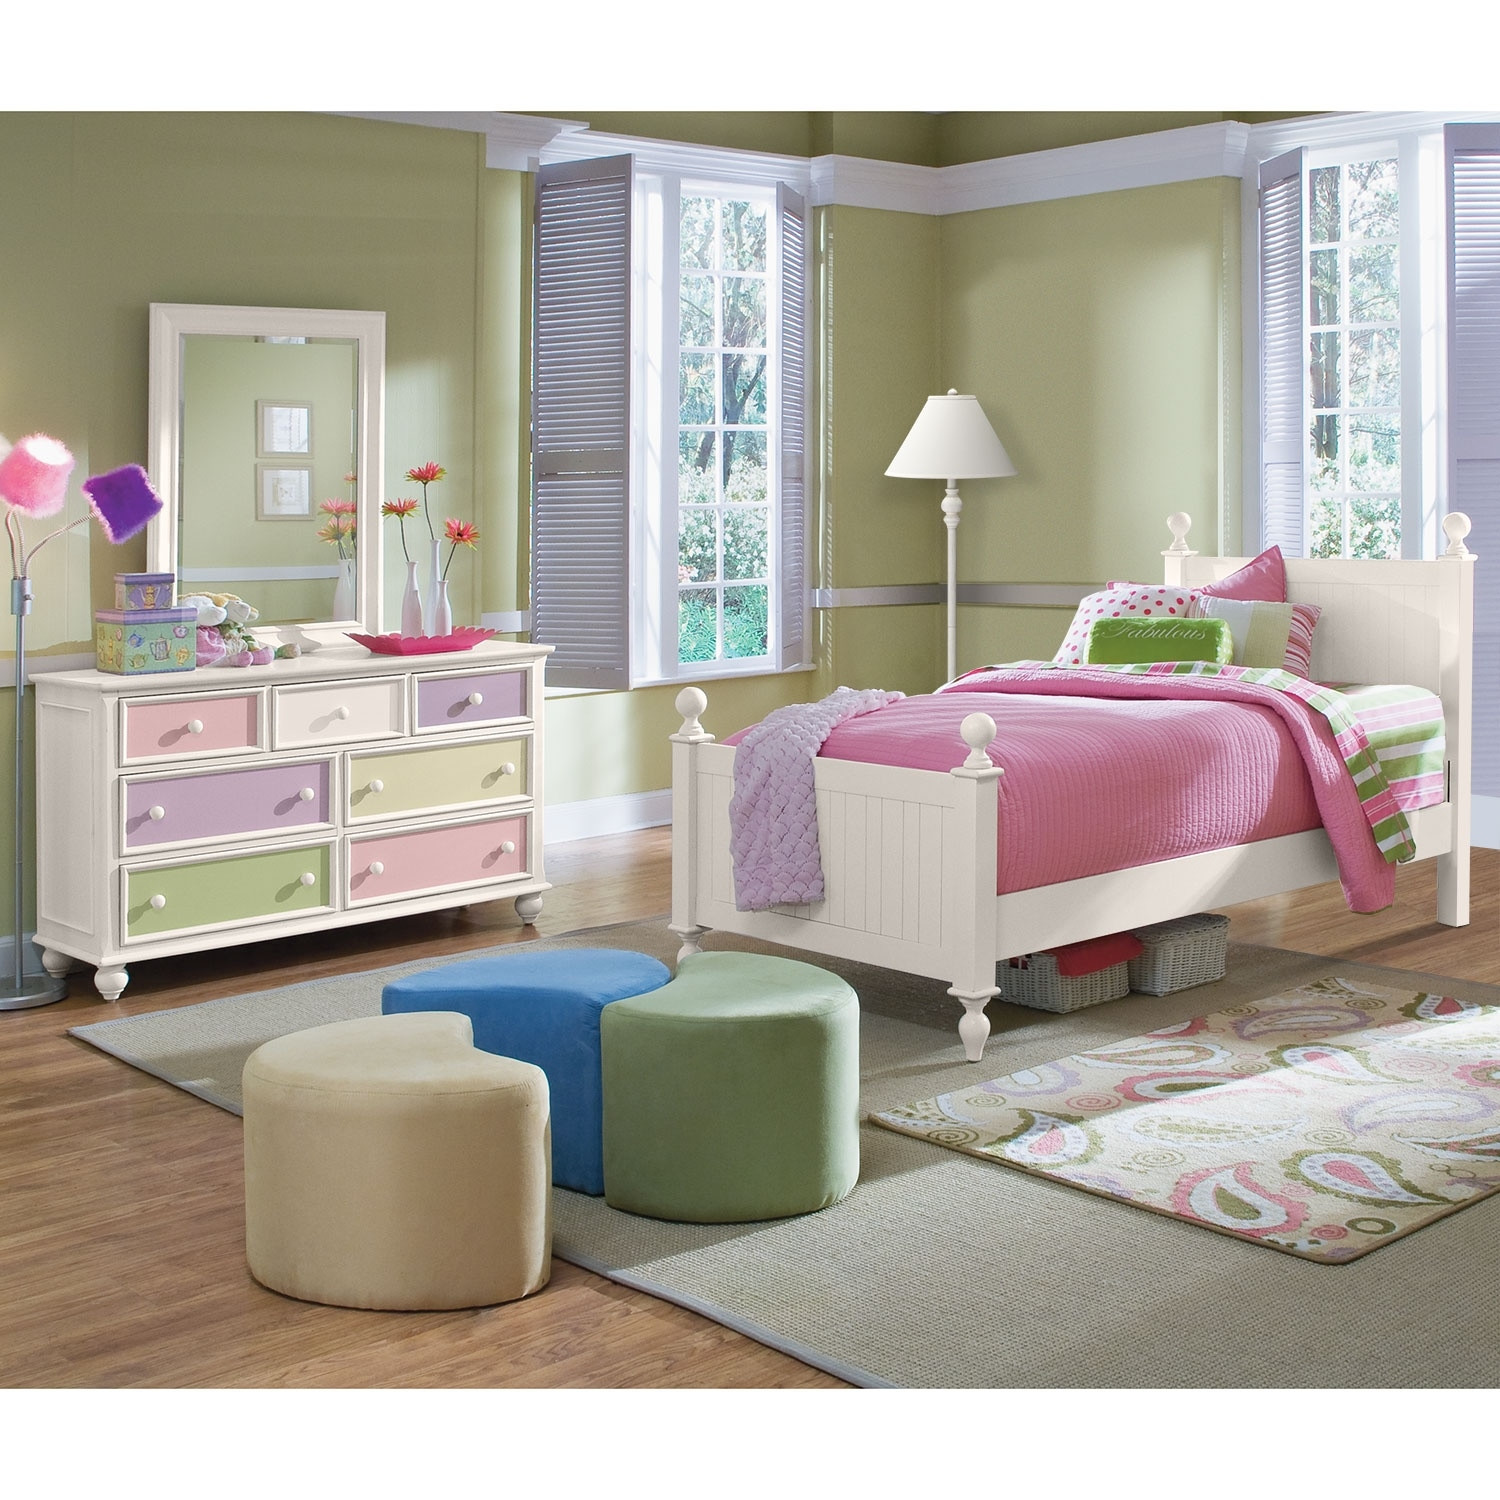 Girls Bedroom Sets Twin
 Colorworks 5 Piece Twin Bedroom Set White